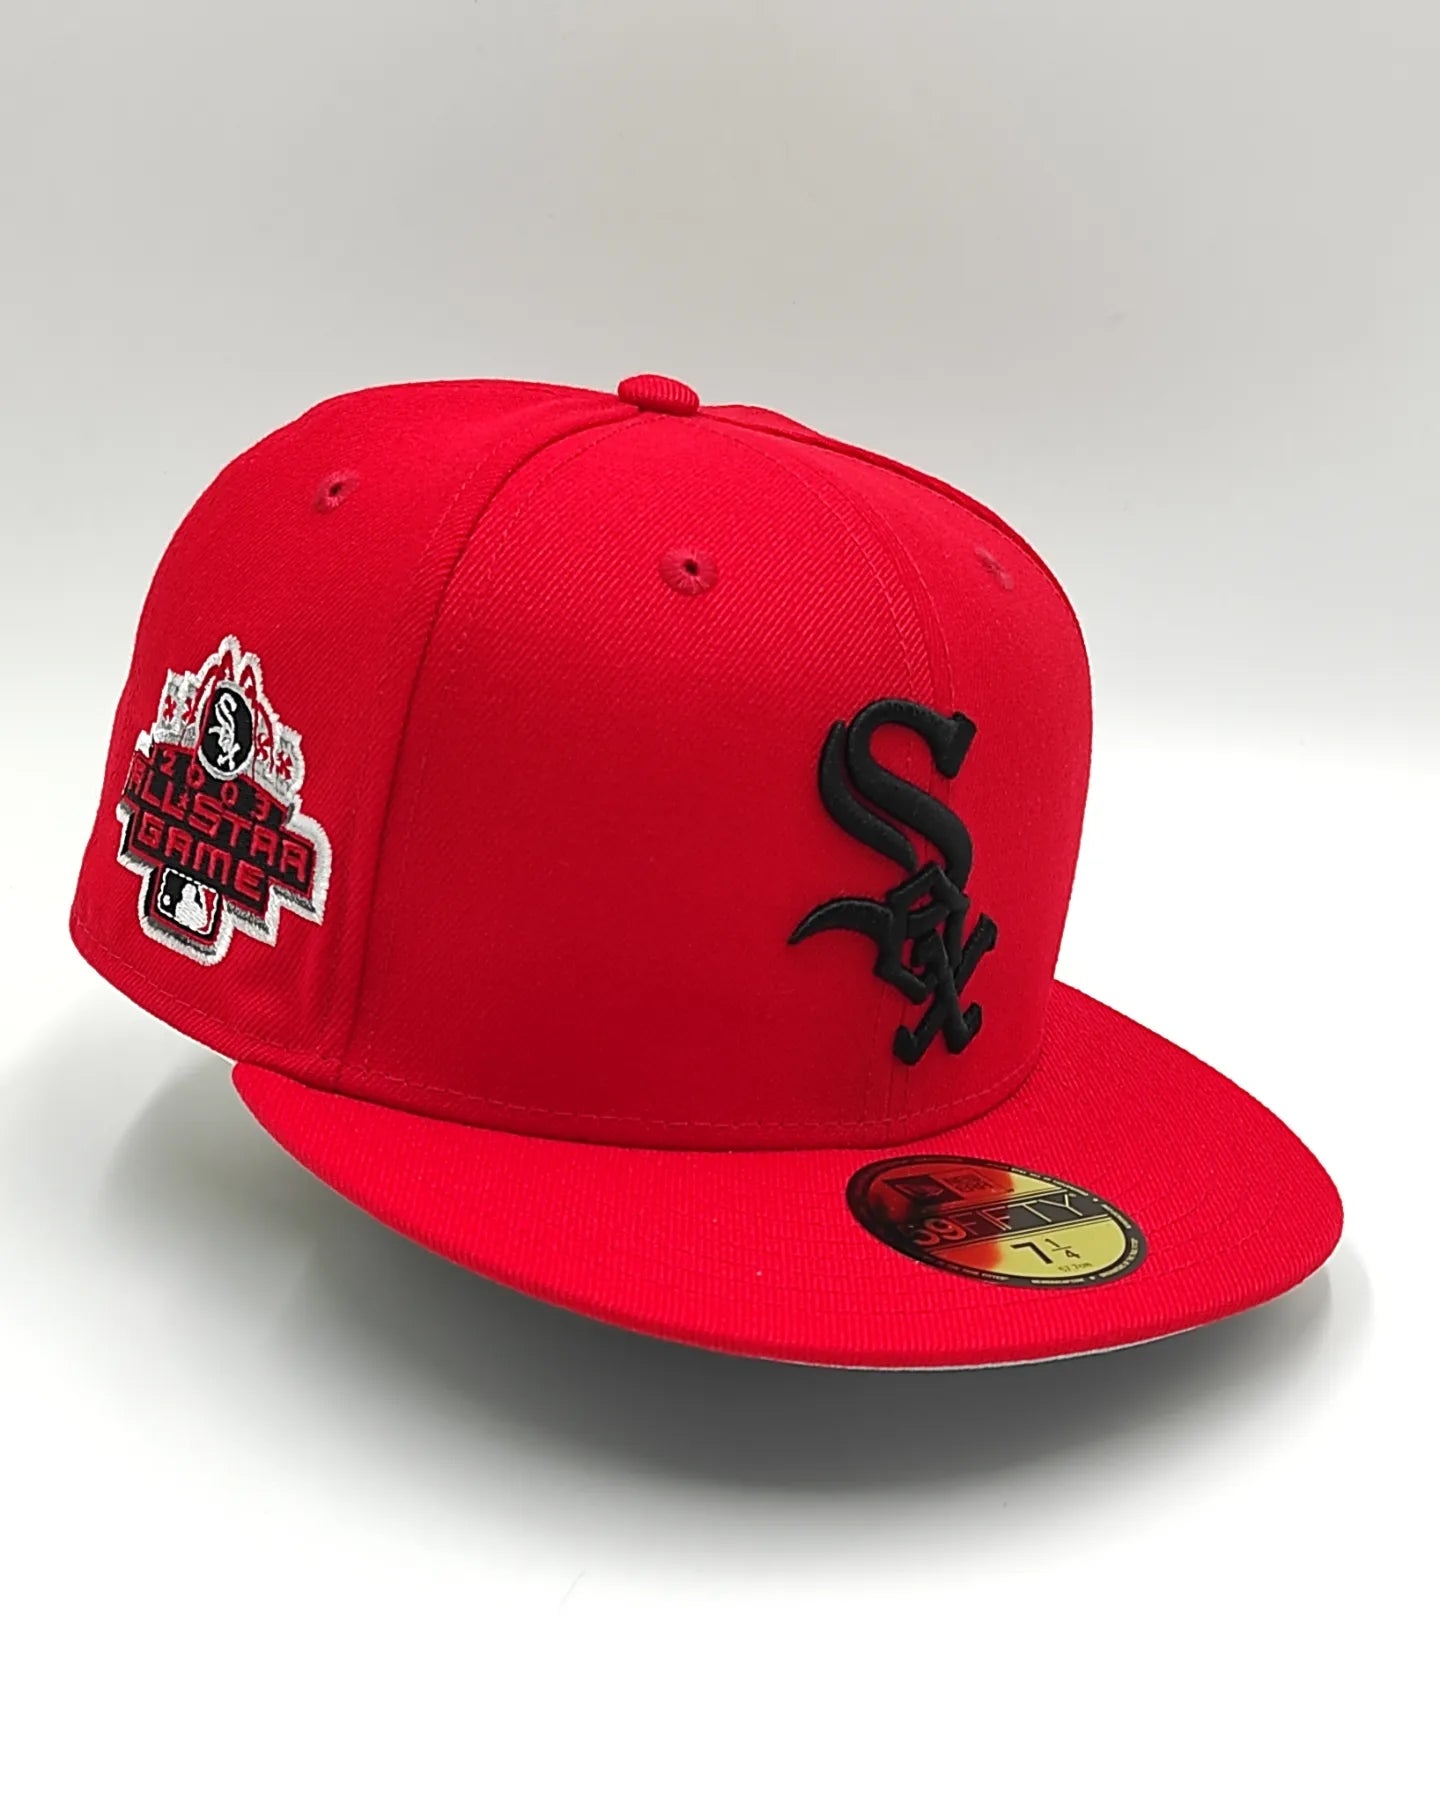 New Era chicago white sox All Star Game 2003 red 59fifty